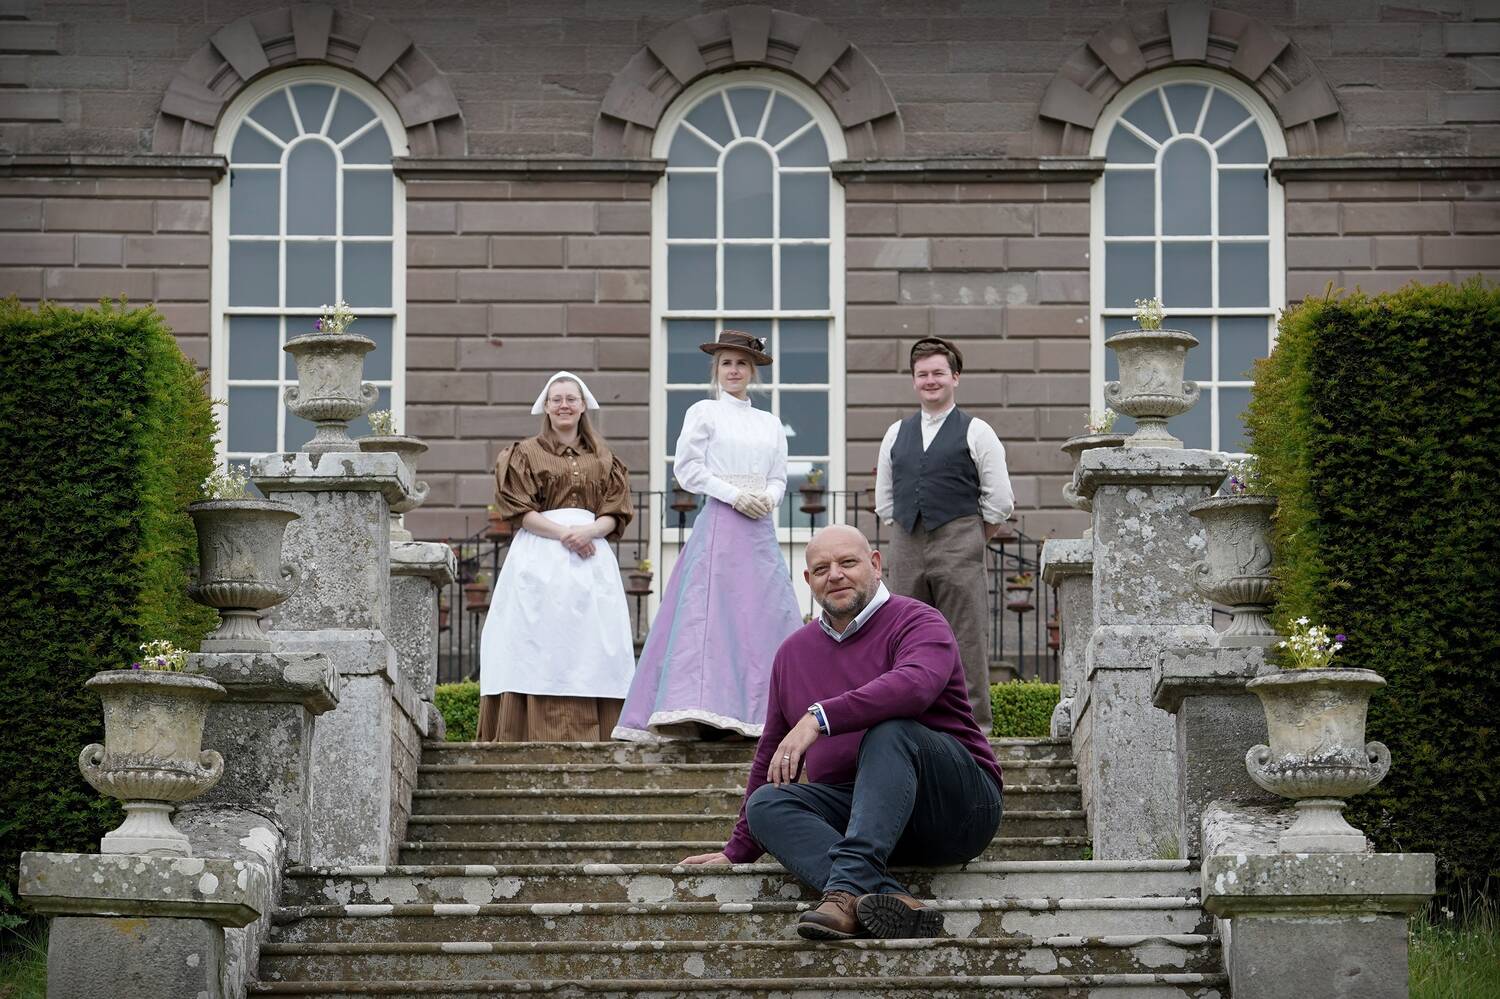 A man sits on the stone steps leading up to a grand Georgian mansion house. Behind him stand three people, dressed in Victorian costumes: a cook on the left, a well-to-do young woman in the centre and an estate worker on the right. Stone urns with pretty bedding plants line the staircase.